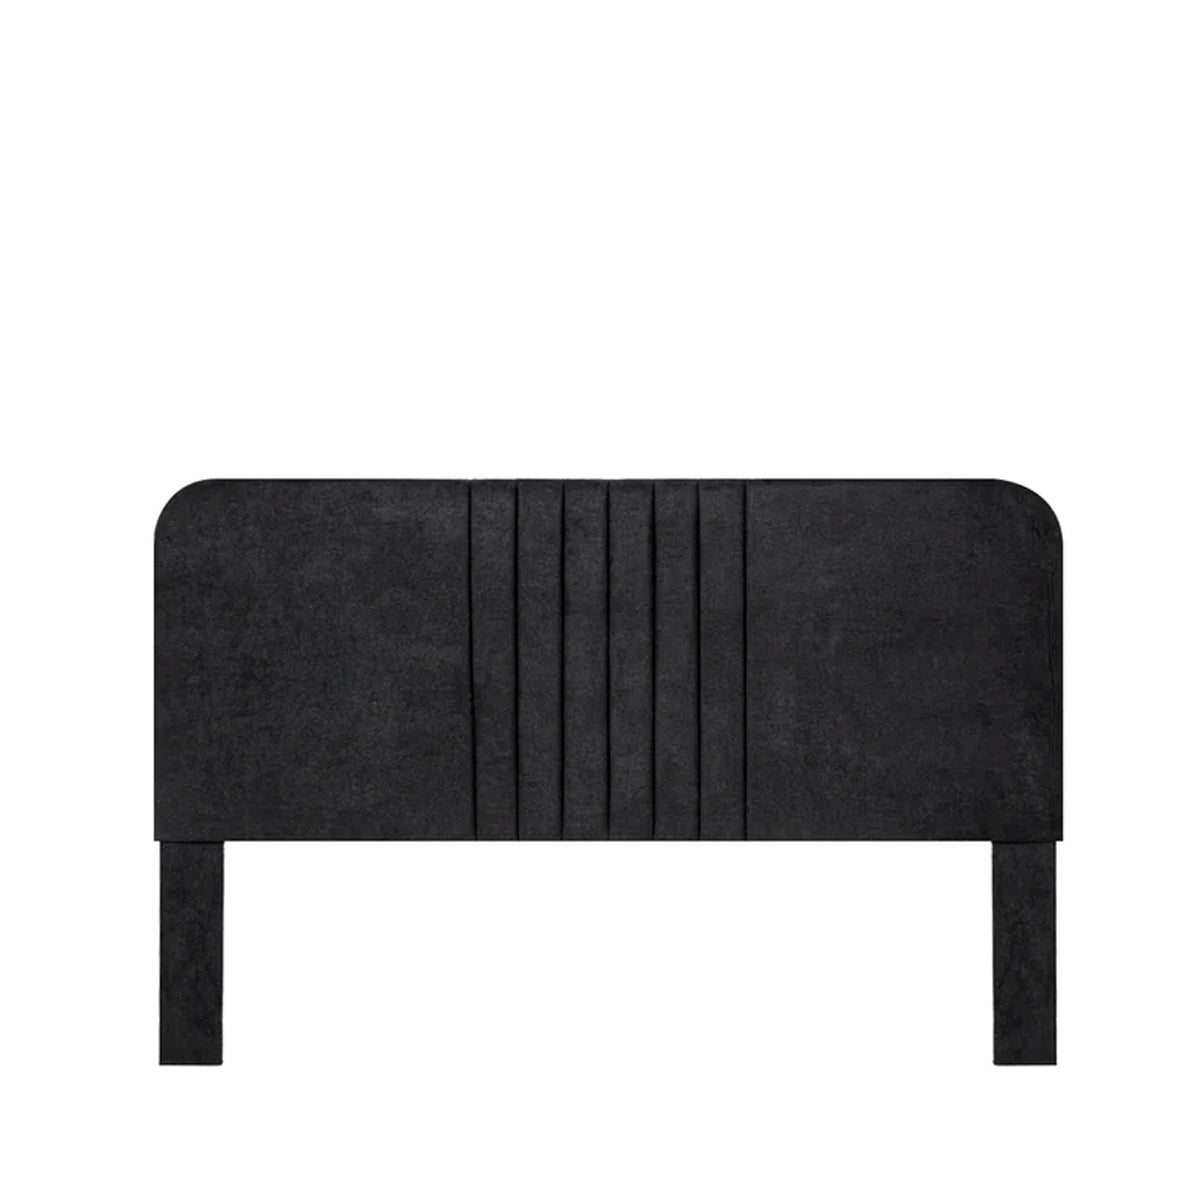 Cabecera Noar queen/king size - Negro - Tugow